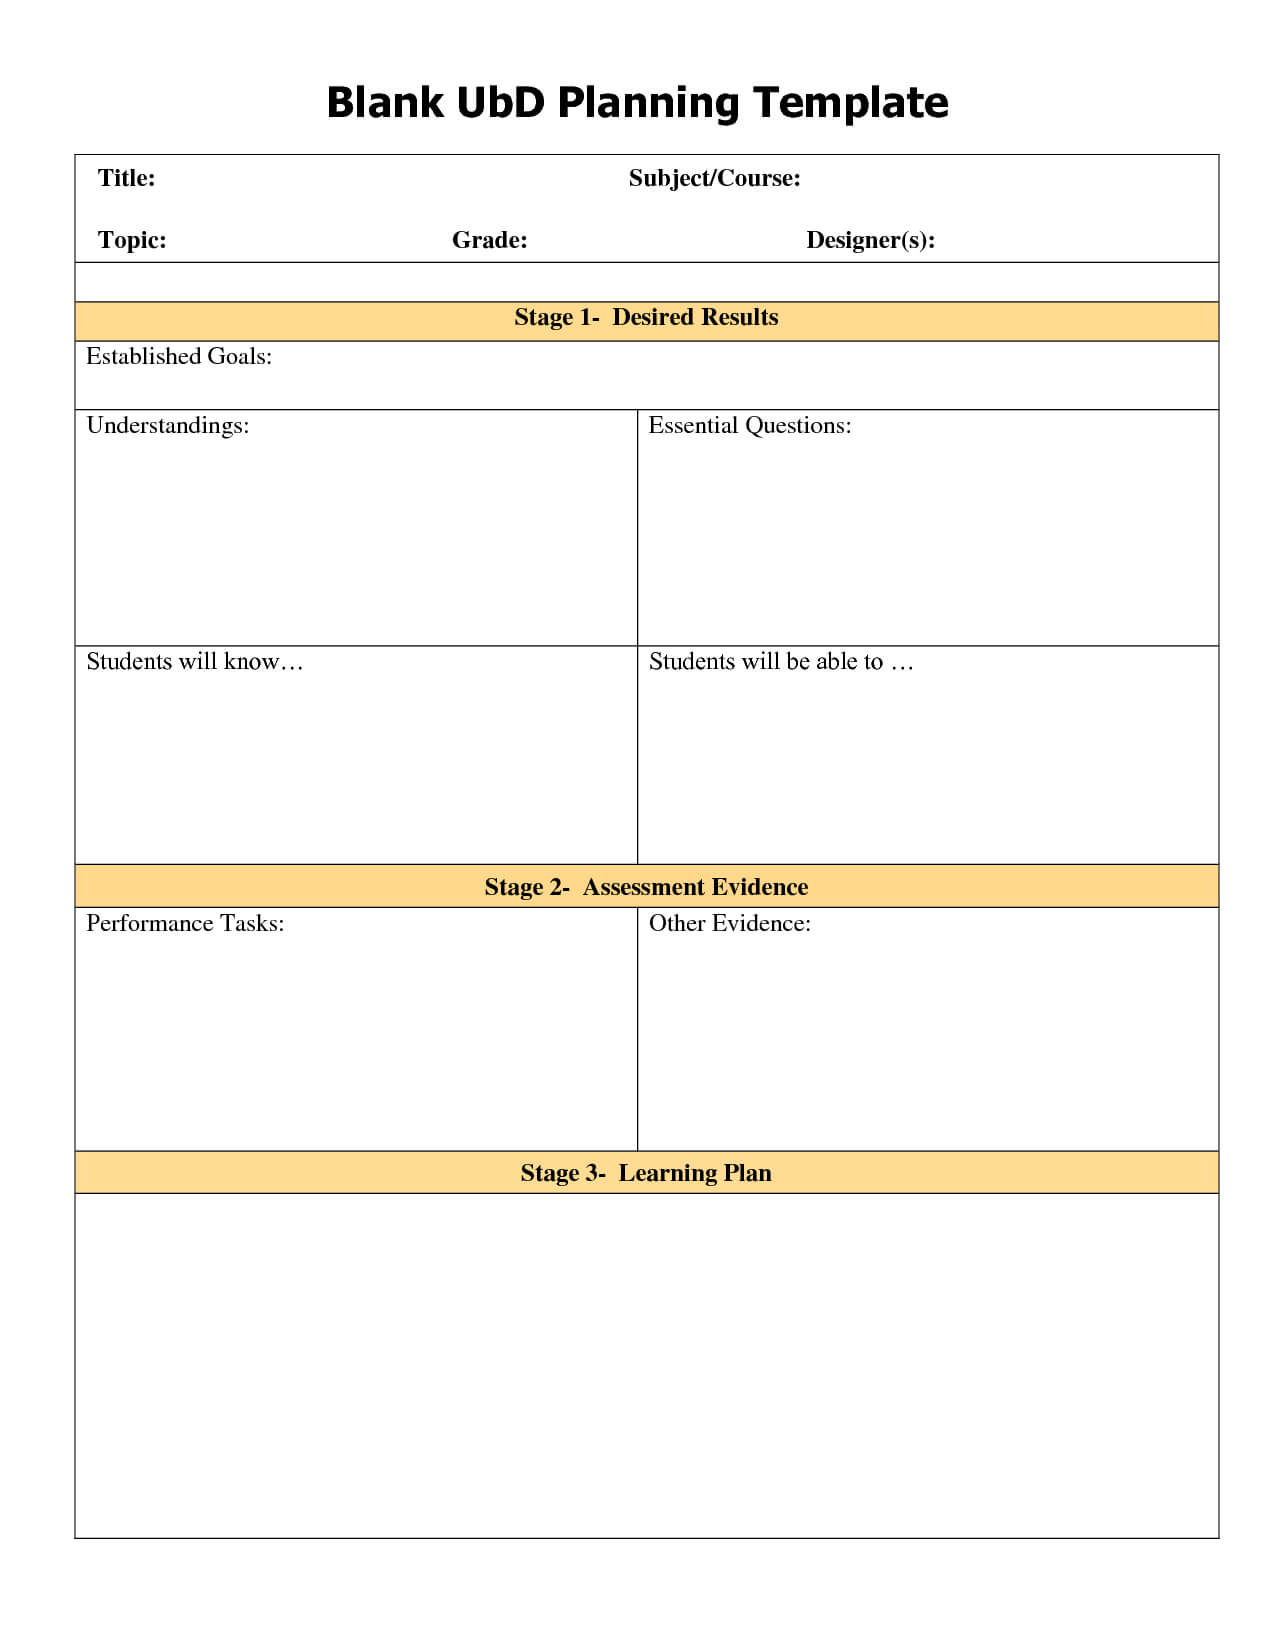 Blank Ubd Template | Blank Ubd Planning Template Pertaining To Blank Unit Lesson Plan Template